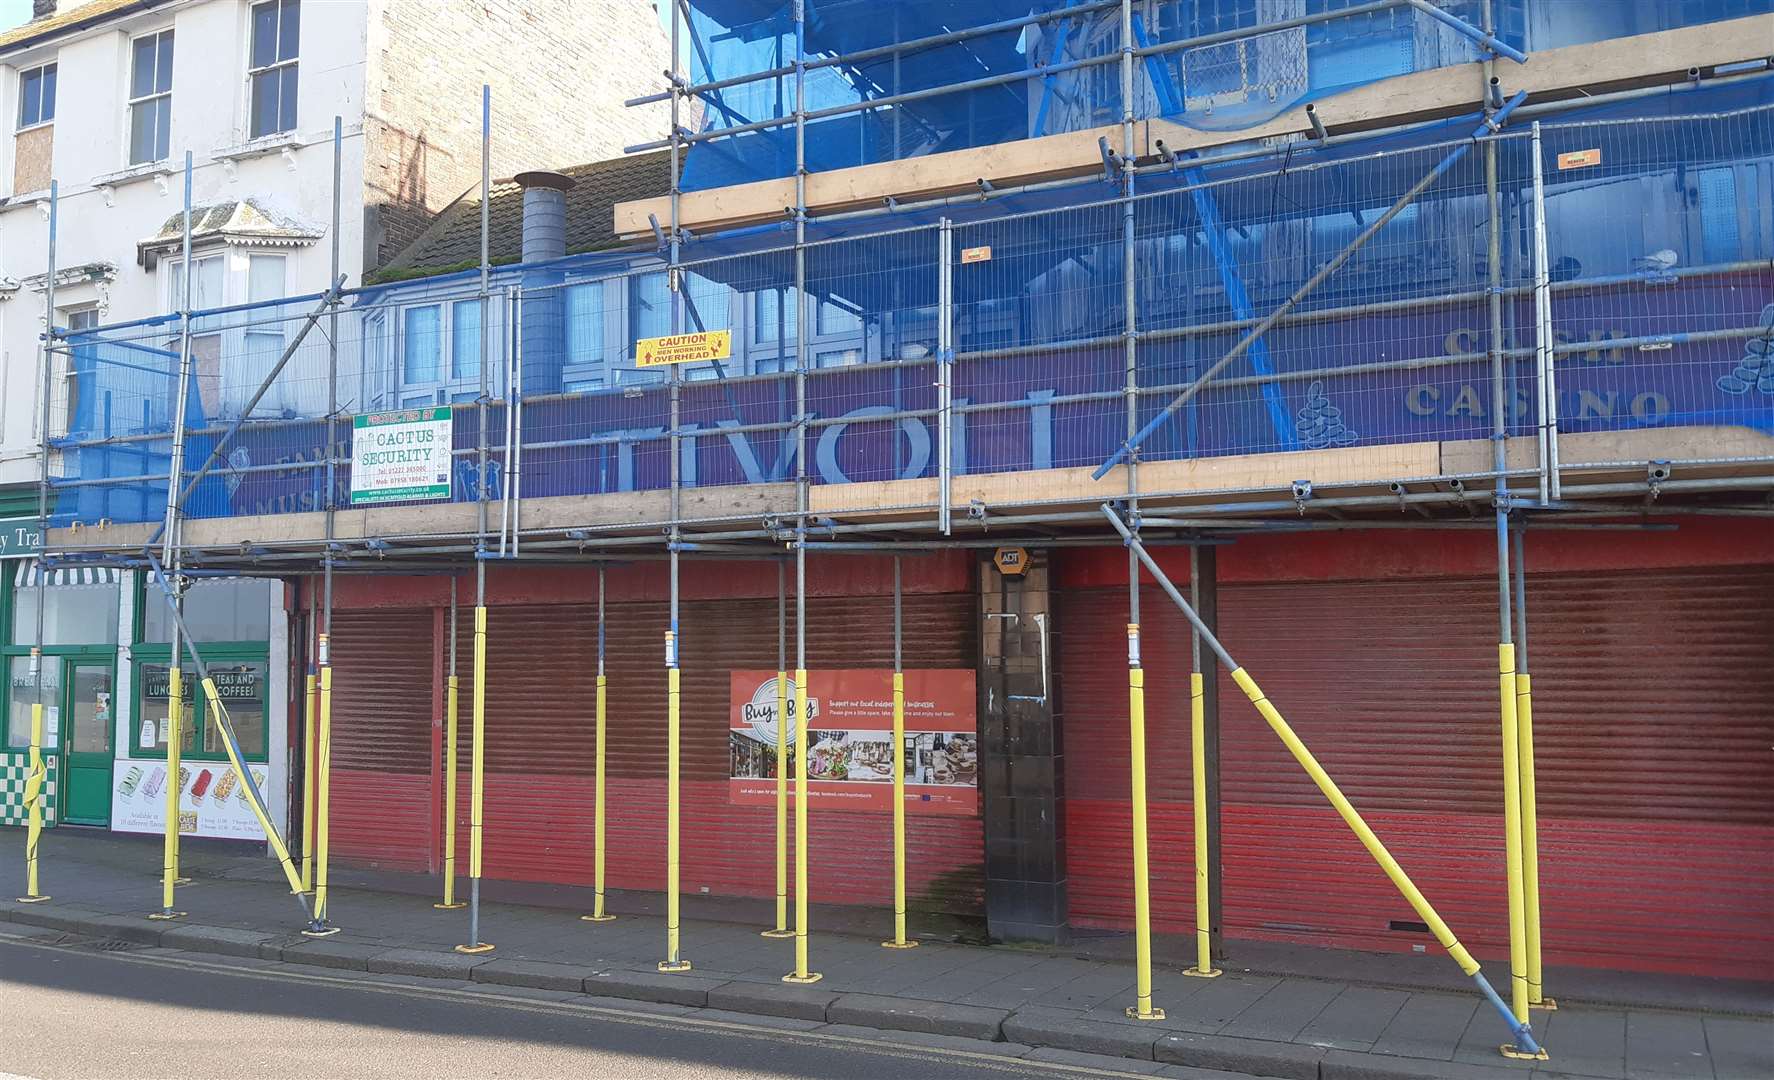 The former Tivoli amusements in Herne Bay have been an eyesore for years